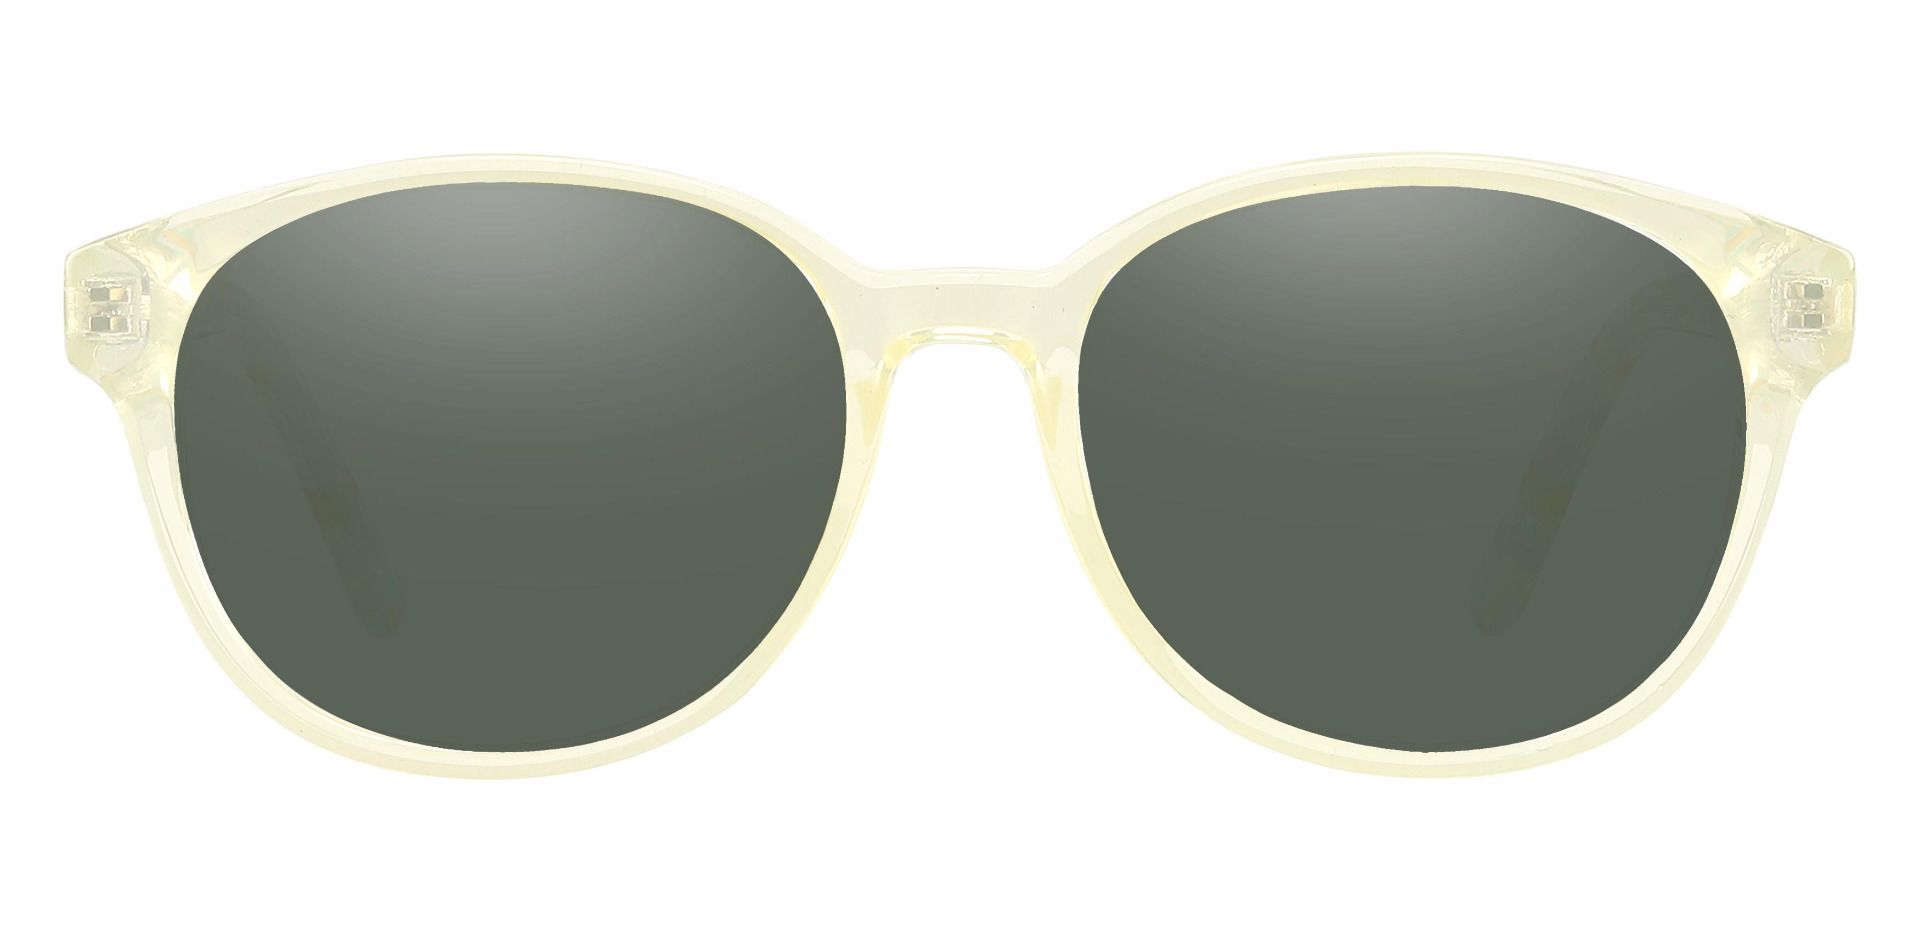 Allegra Oval Lined Bifocal Sunglasses - Green Frame With Green Lenses